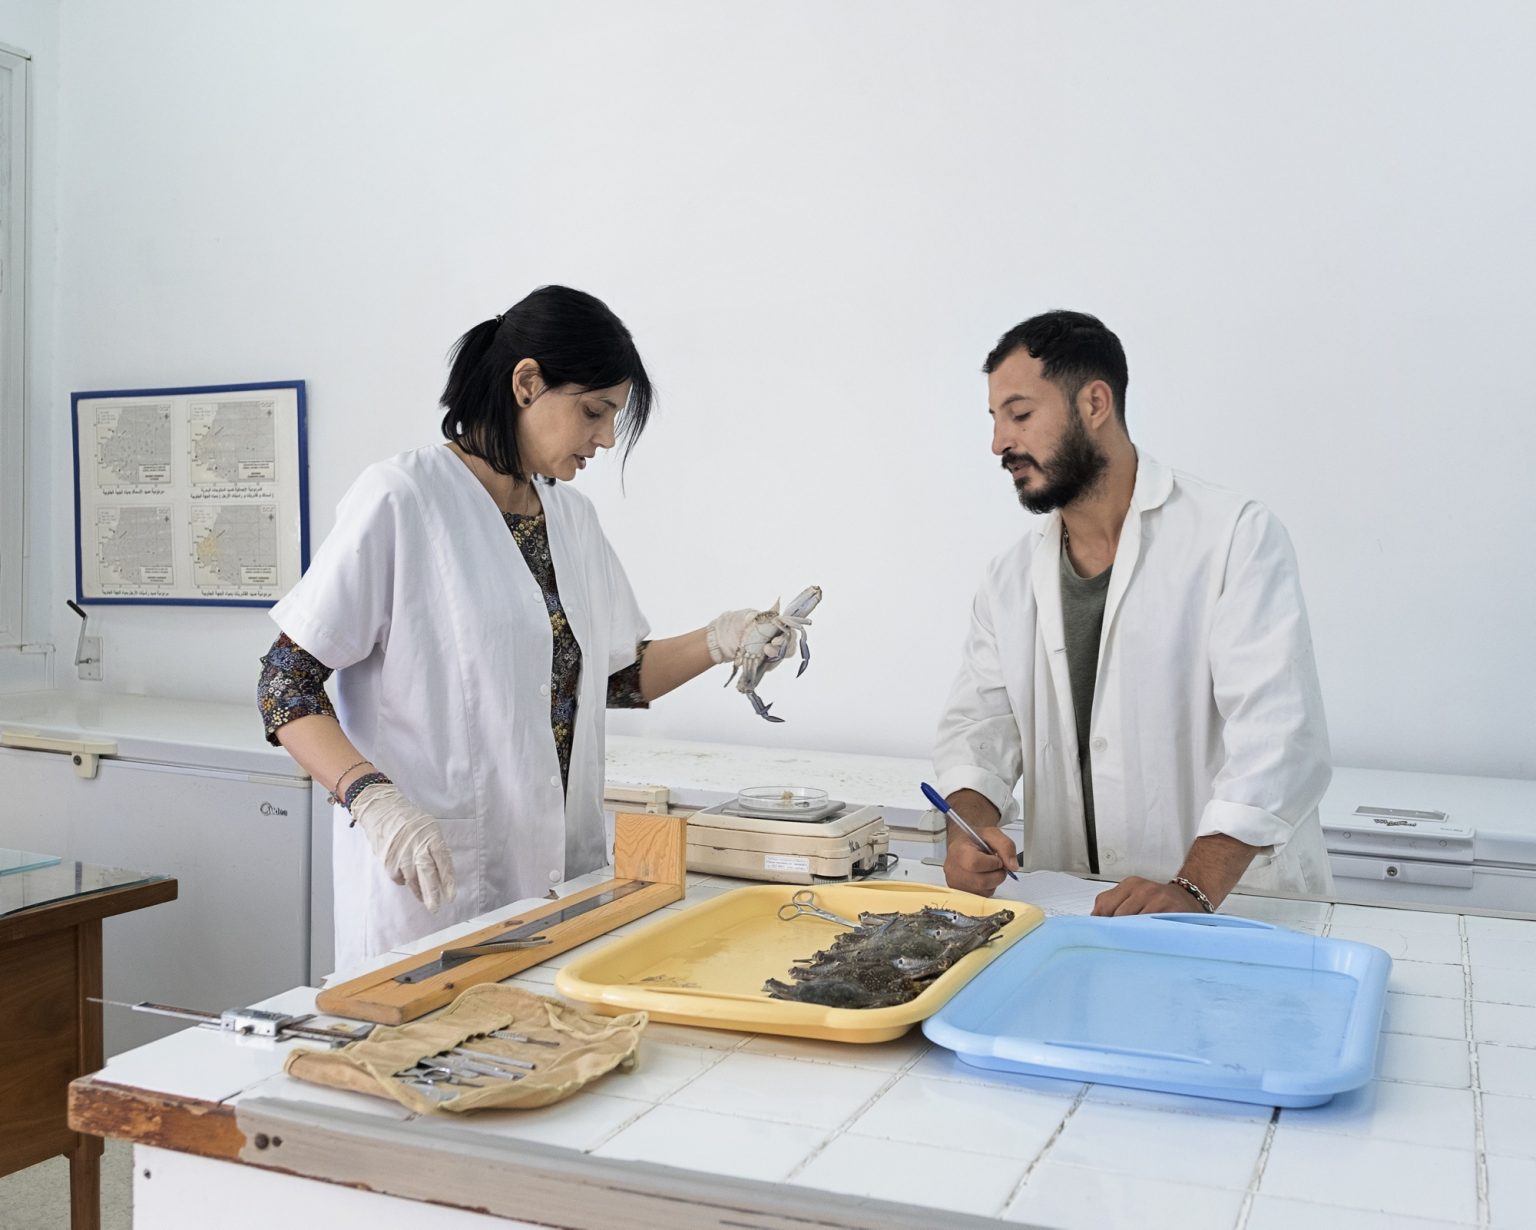 Sfax (Tunisia), June 2022 - Researchers Olfa Ben Abdallah and Mohamed Ali Labni examine the blue crab (Portunus Segnis) at the INSTM (Institut National Des Sciences Et Technologies De La Mer). Olfa deals with fisheries sciences and specializes in marine biology, stock evaluation and exotic crustaceans. In particular, in recent years she has been involved in studying the blue crab.
><
Sfax (Tunisia), giugno 2022 -  I ricercatori Olfa Ben Abdallah e Mohamed Ali Labni esaminano il granchio blu (Portunus segnis) presso lINSTM (Institut National Des Sciences Et Technologies De La Mer). Olfa si occupa di scienze della pesca ed è specializzata in biologia marina, valutazioni di stock e crostacei esotici. In particolare negli ultimi anni si è occupata di studiare il granchio blu.